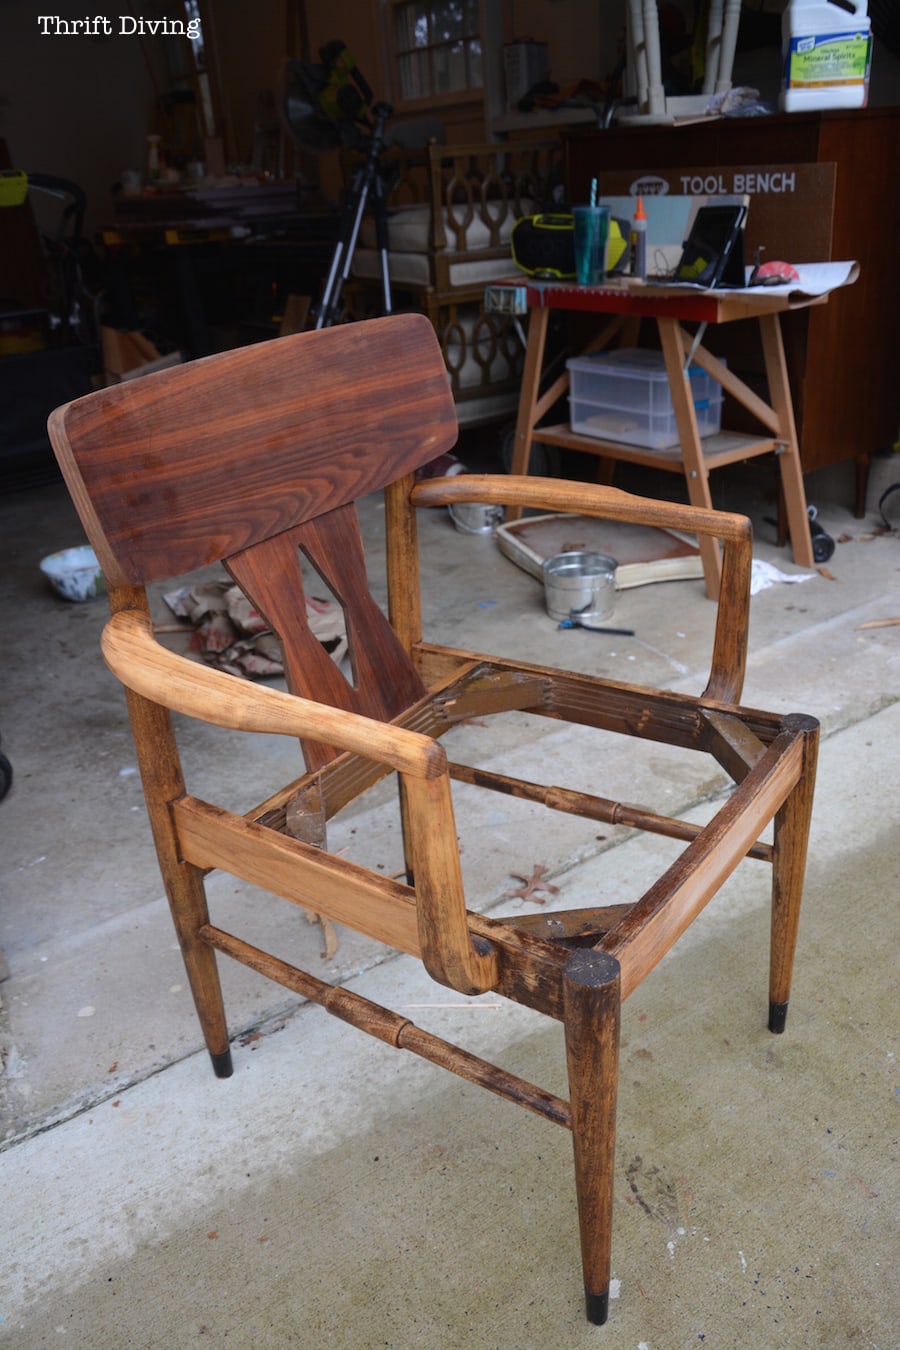 The Makeover of a Mid Century Modern Chair - PART 1 - ThriftDiving.com